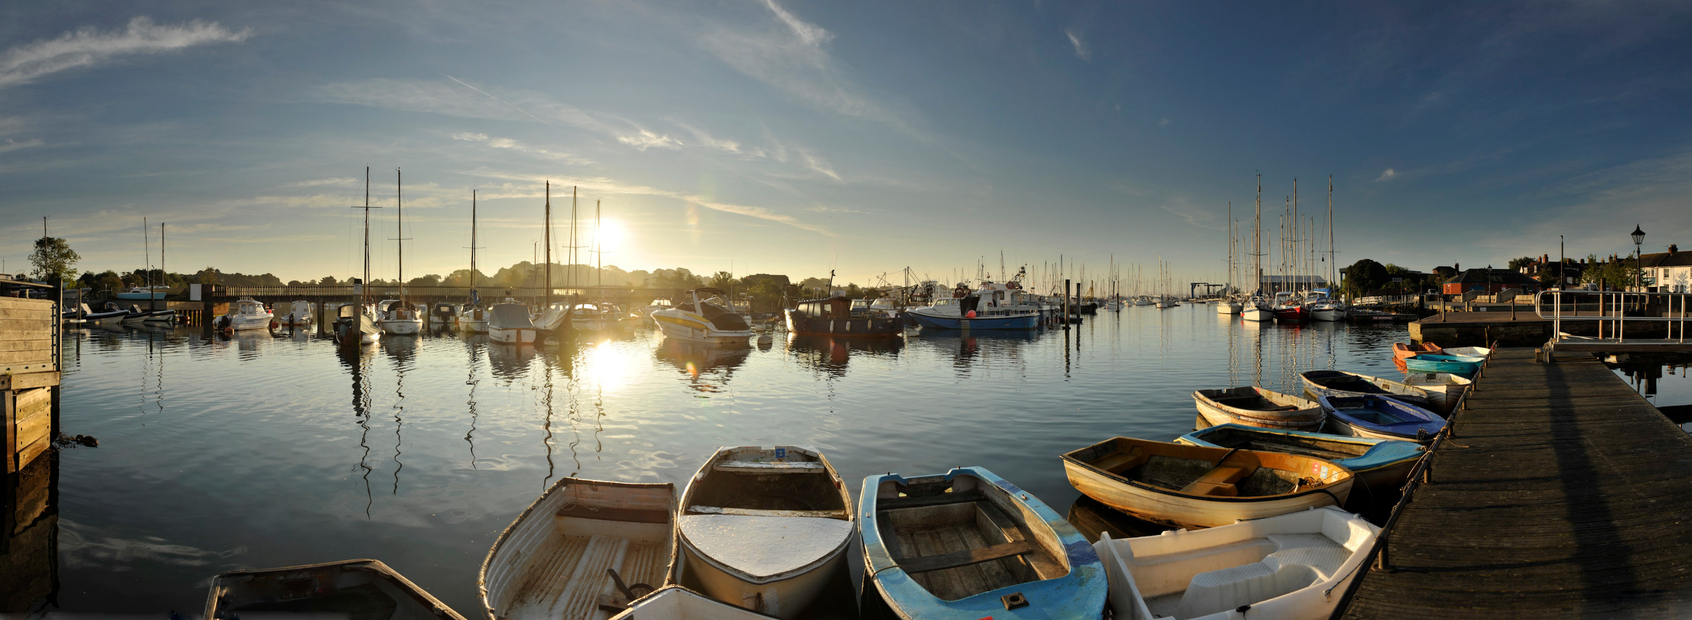 A panoramic image of Lymington Harbour in Hampshire England taken at dawn with the sun just above the horizon, taken on a bright summers day